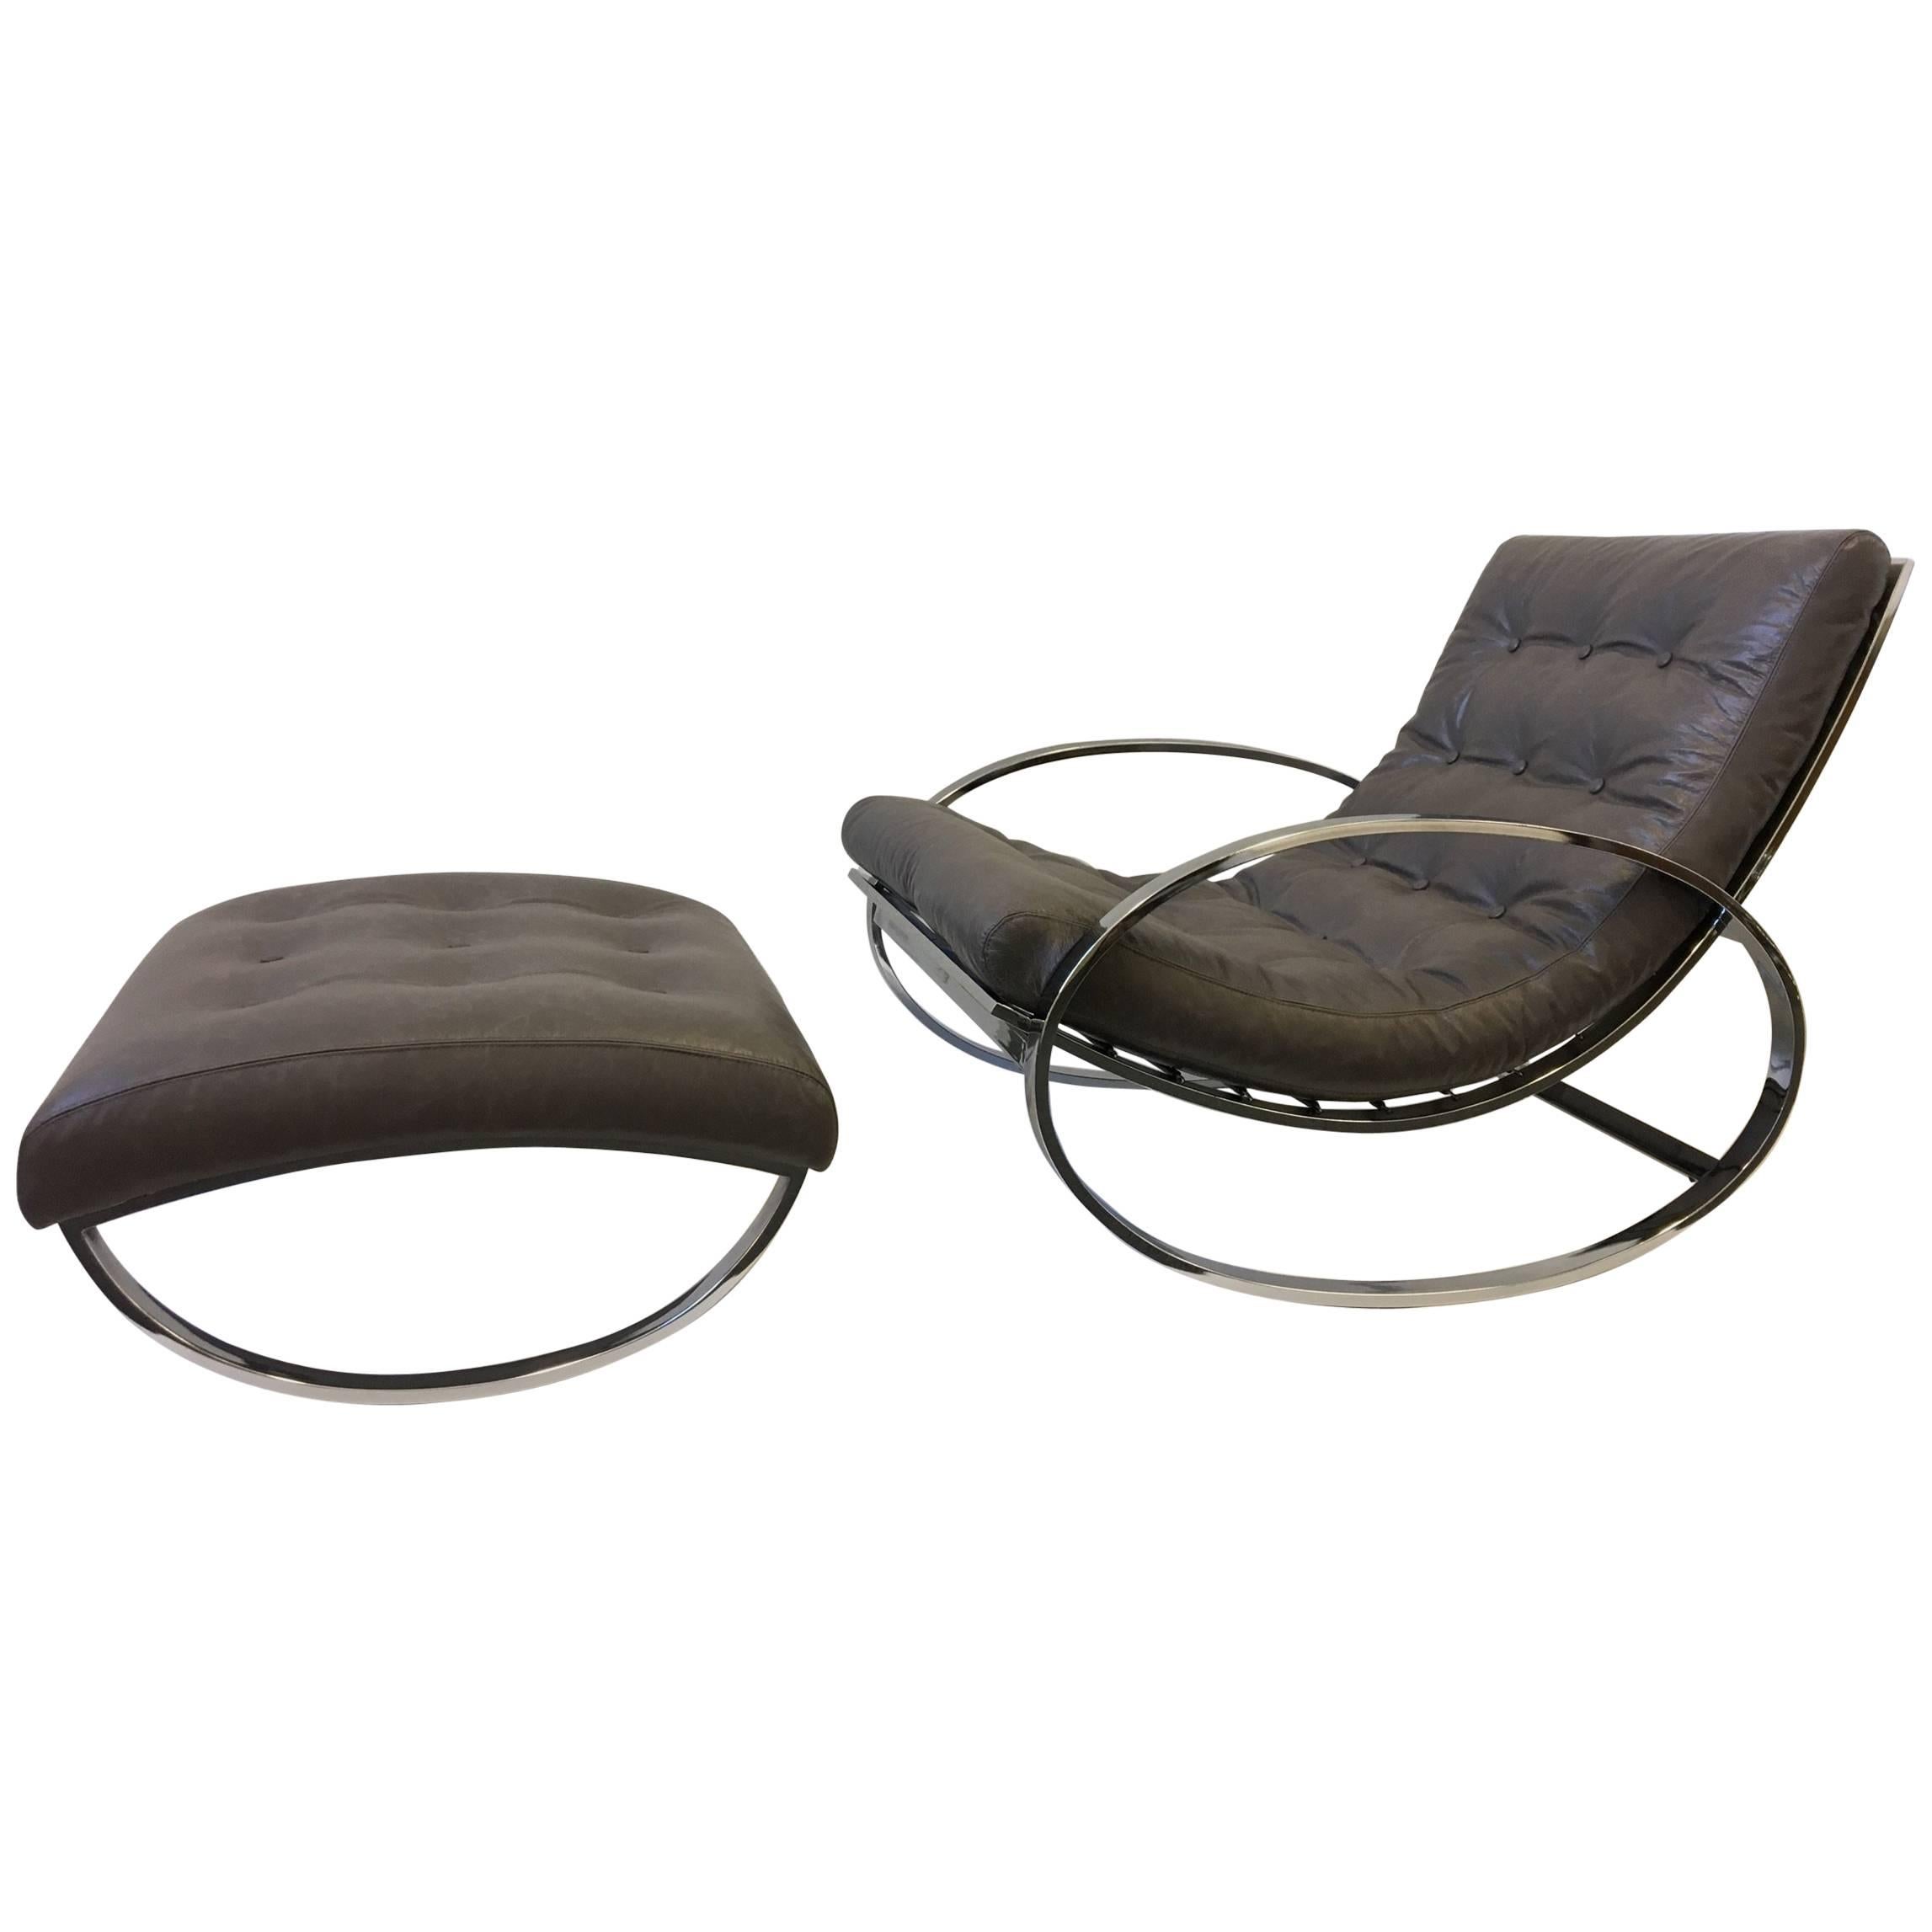 Chrome and Leather Rocking Chair and Ottoman by Renato Zevi